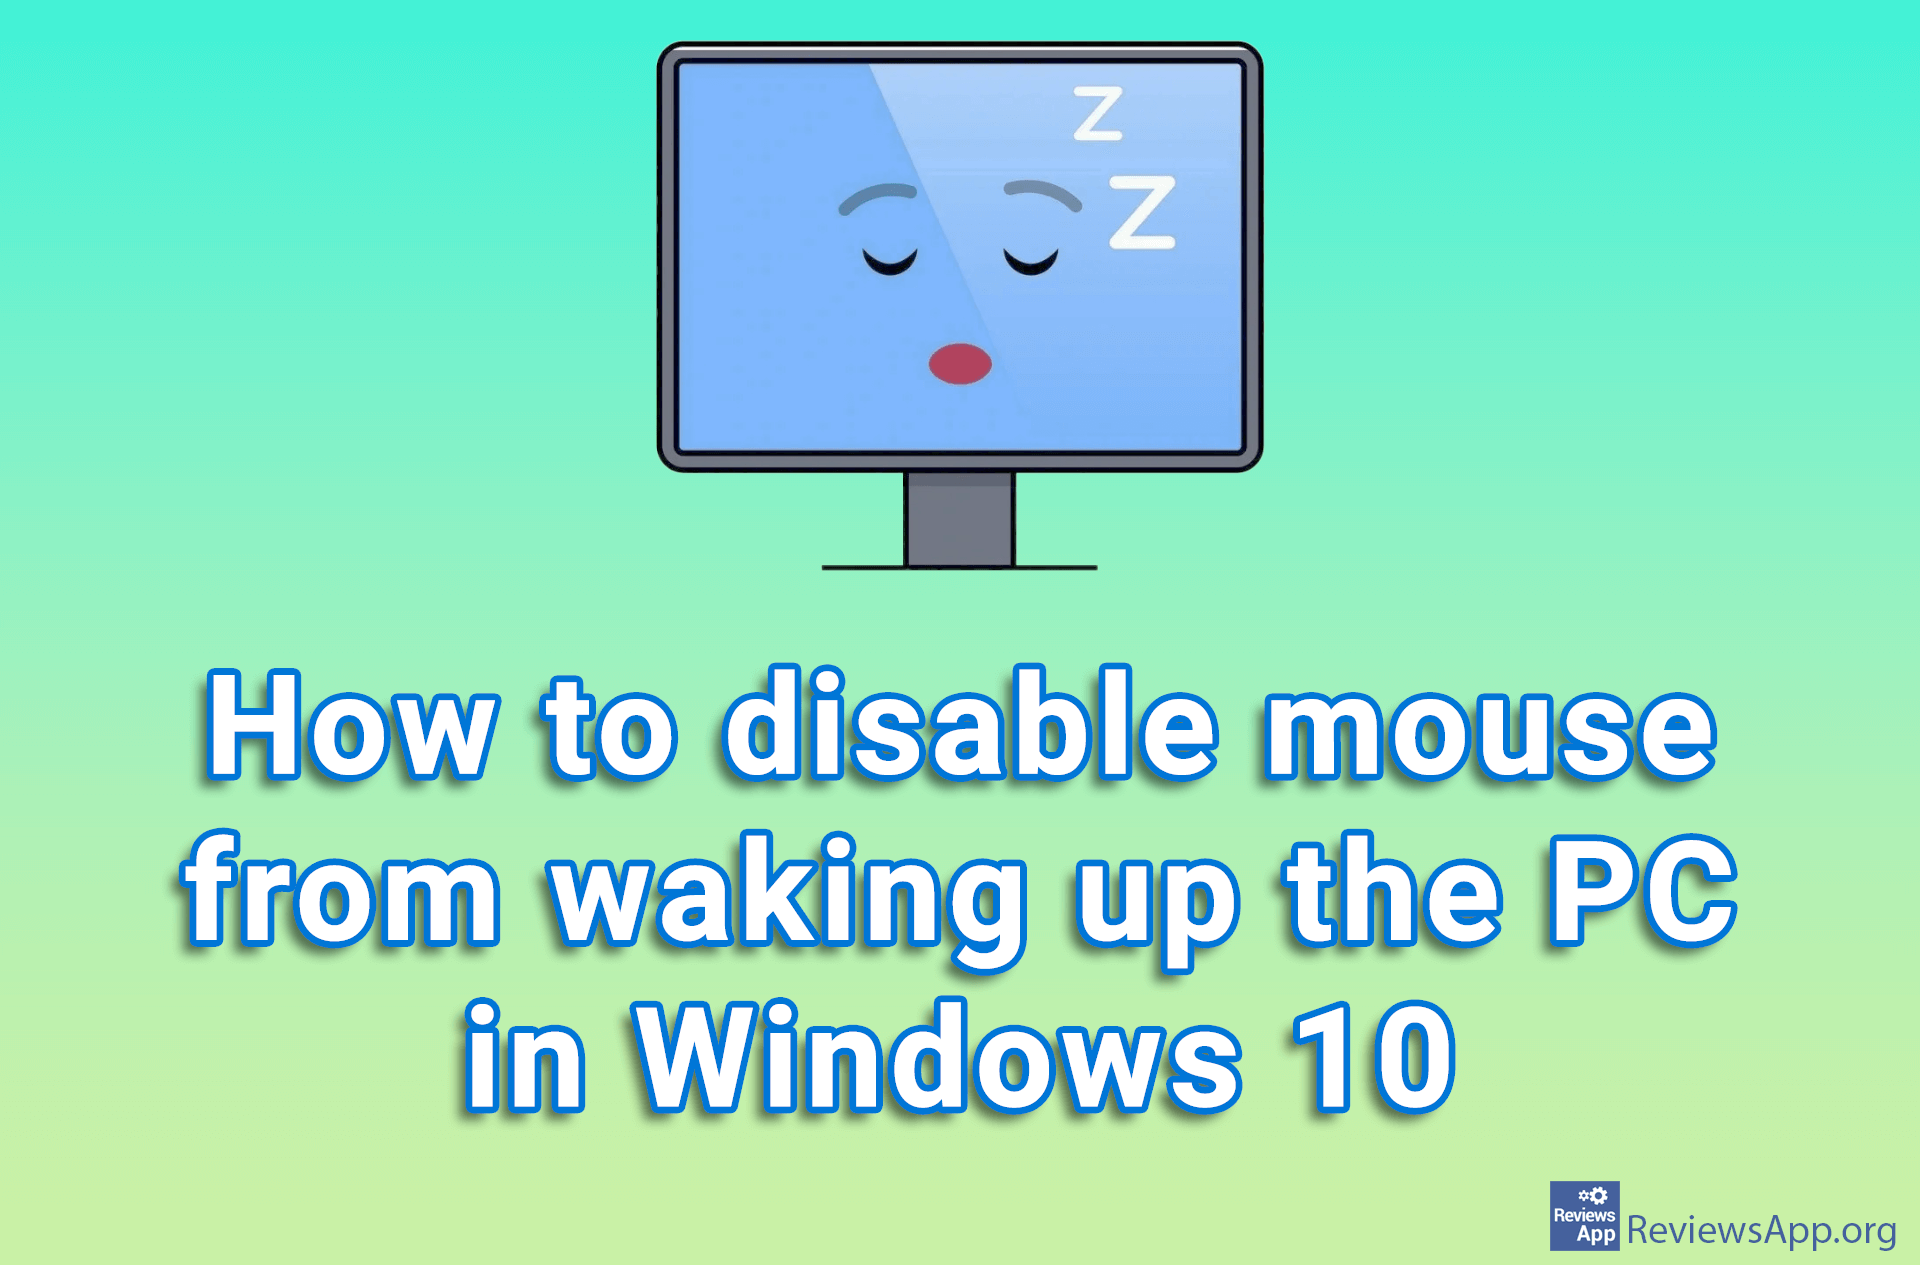 How to disable mouse from waking up the PC in Windows 10